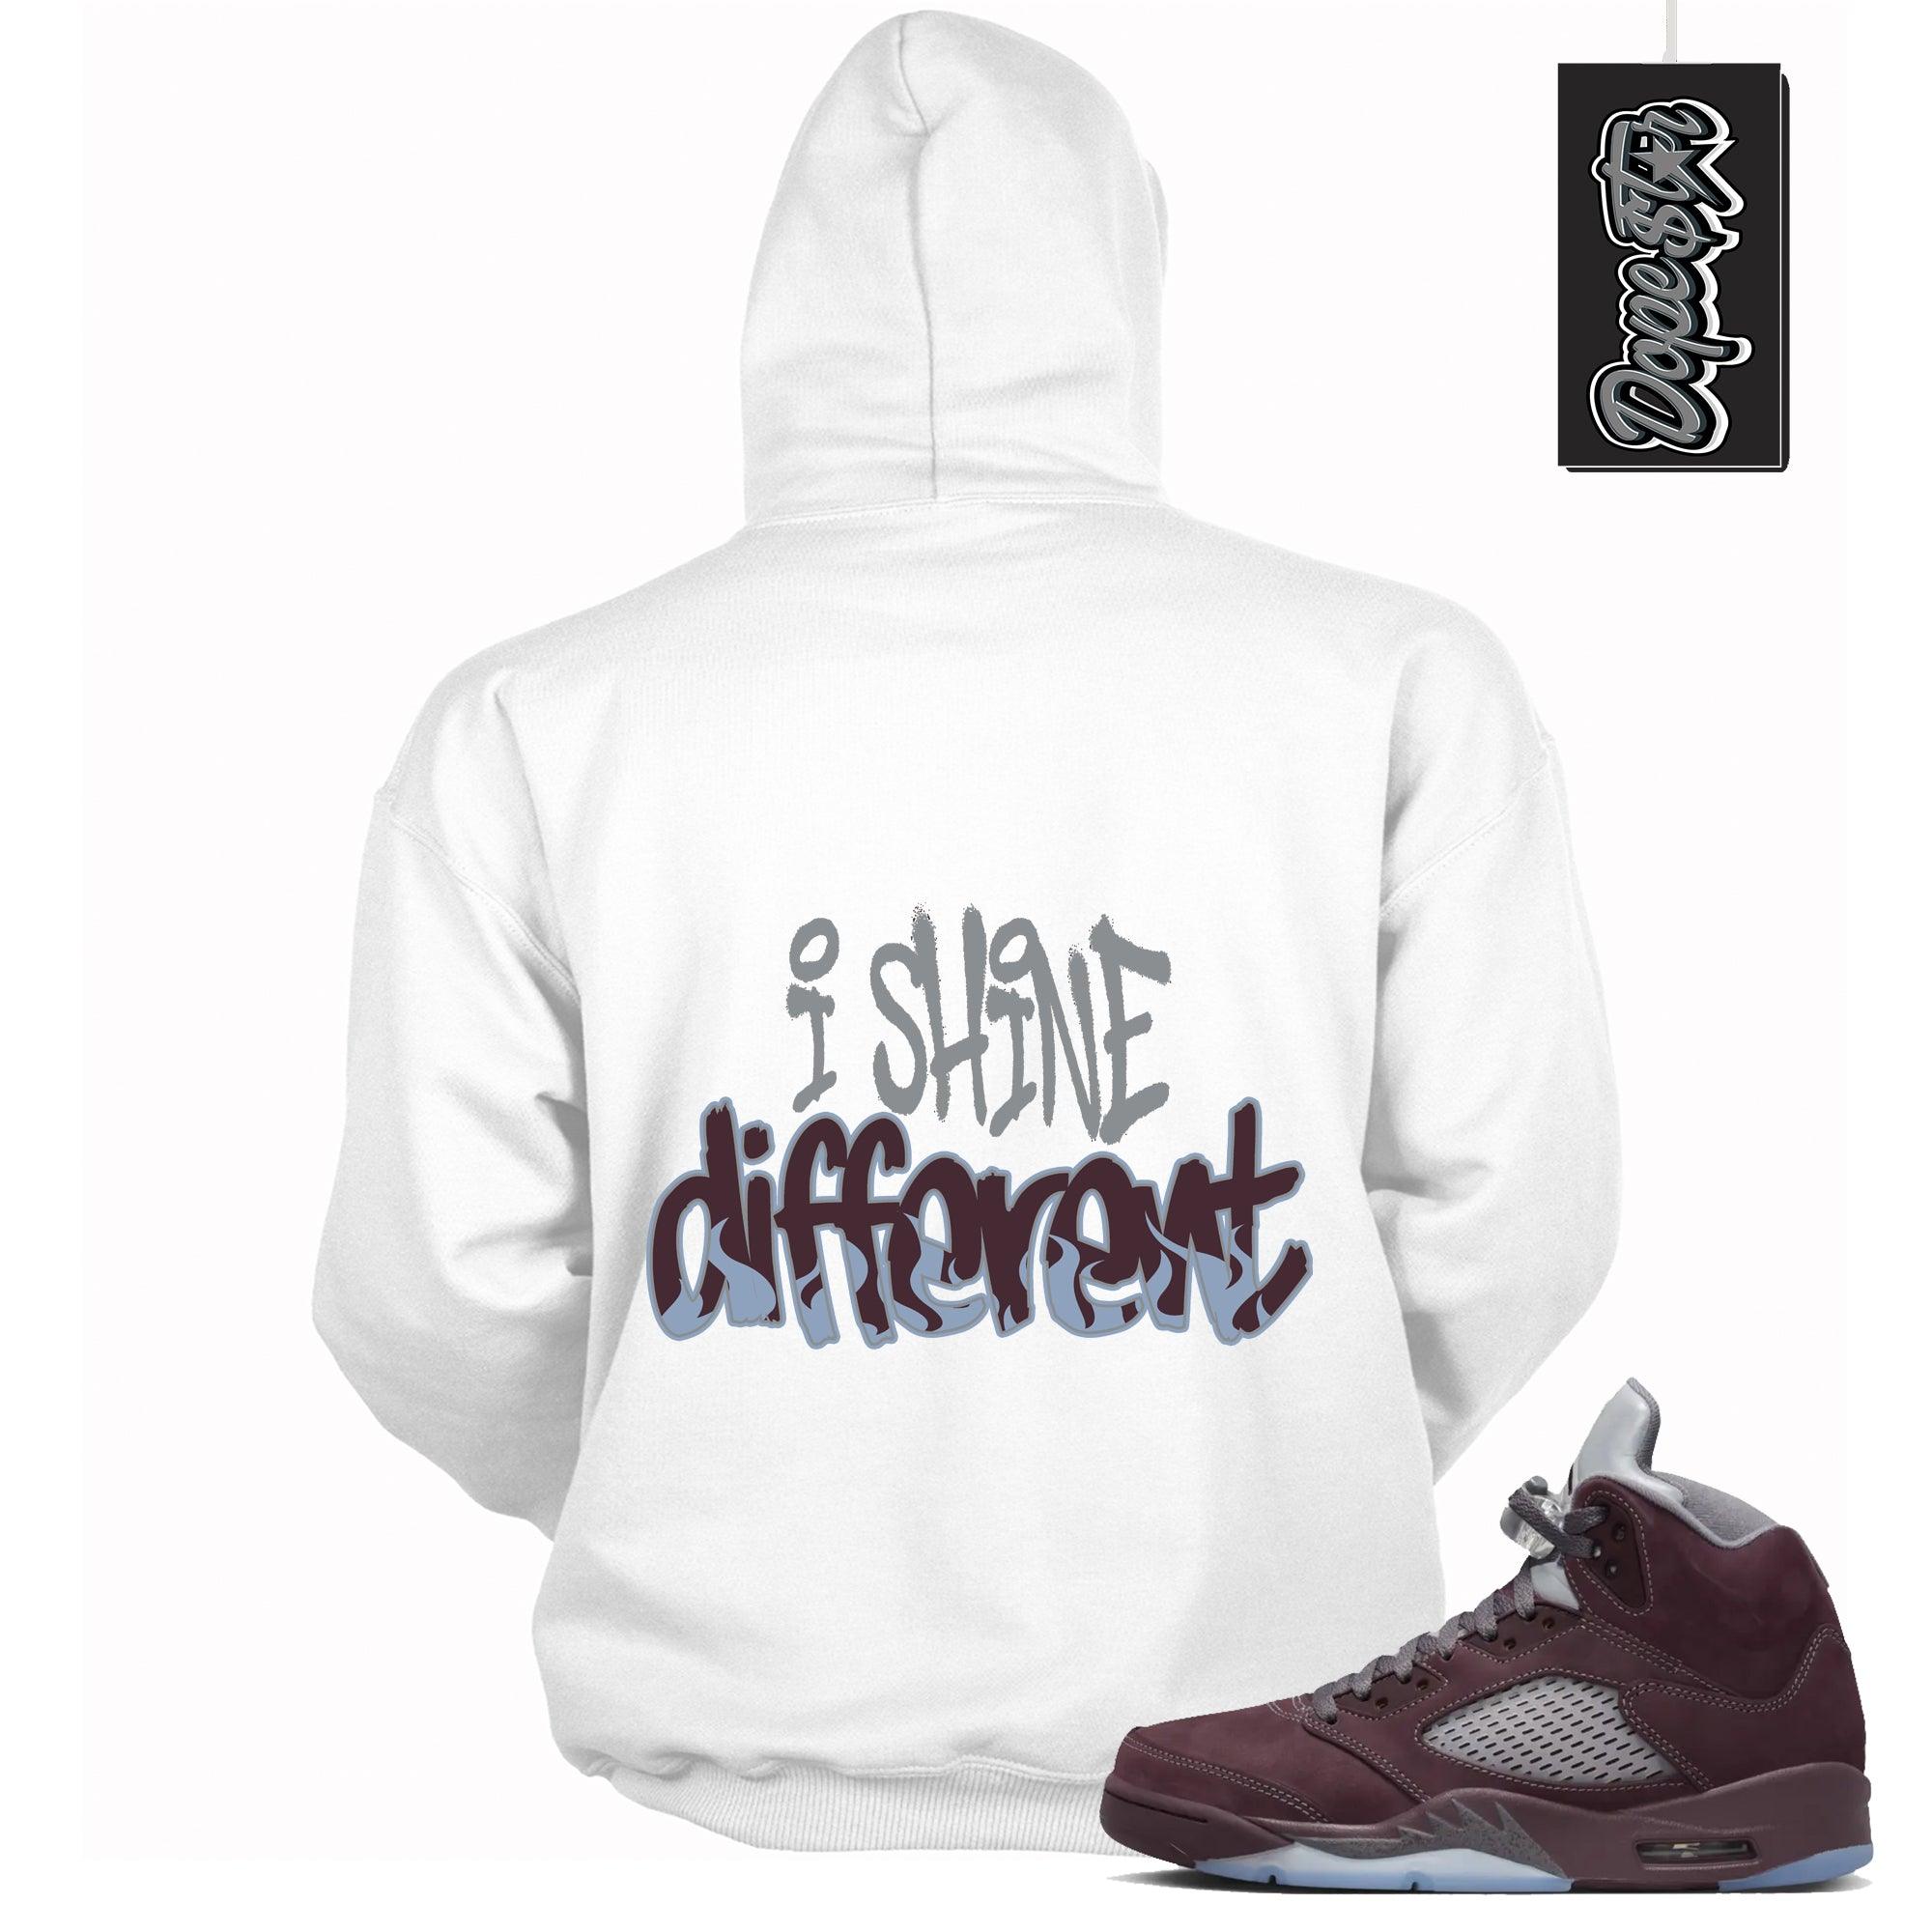 Cool White Graphic Hoodie with “  I Shine Different “ print, that perfectly matches Air Jordan 5 Burgundy 2023 sneakers